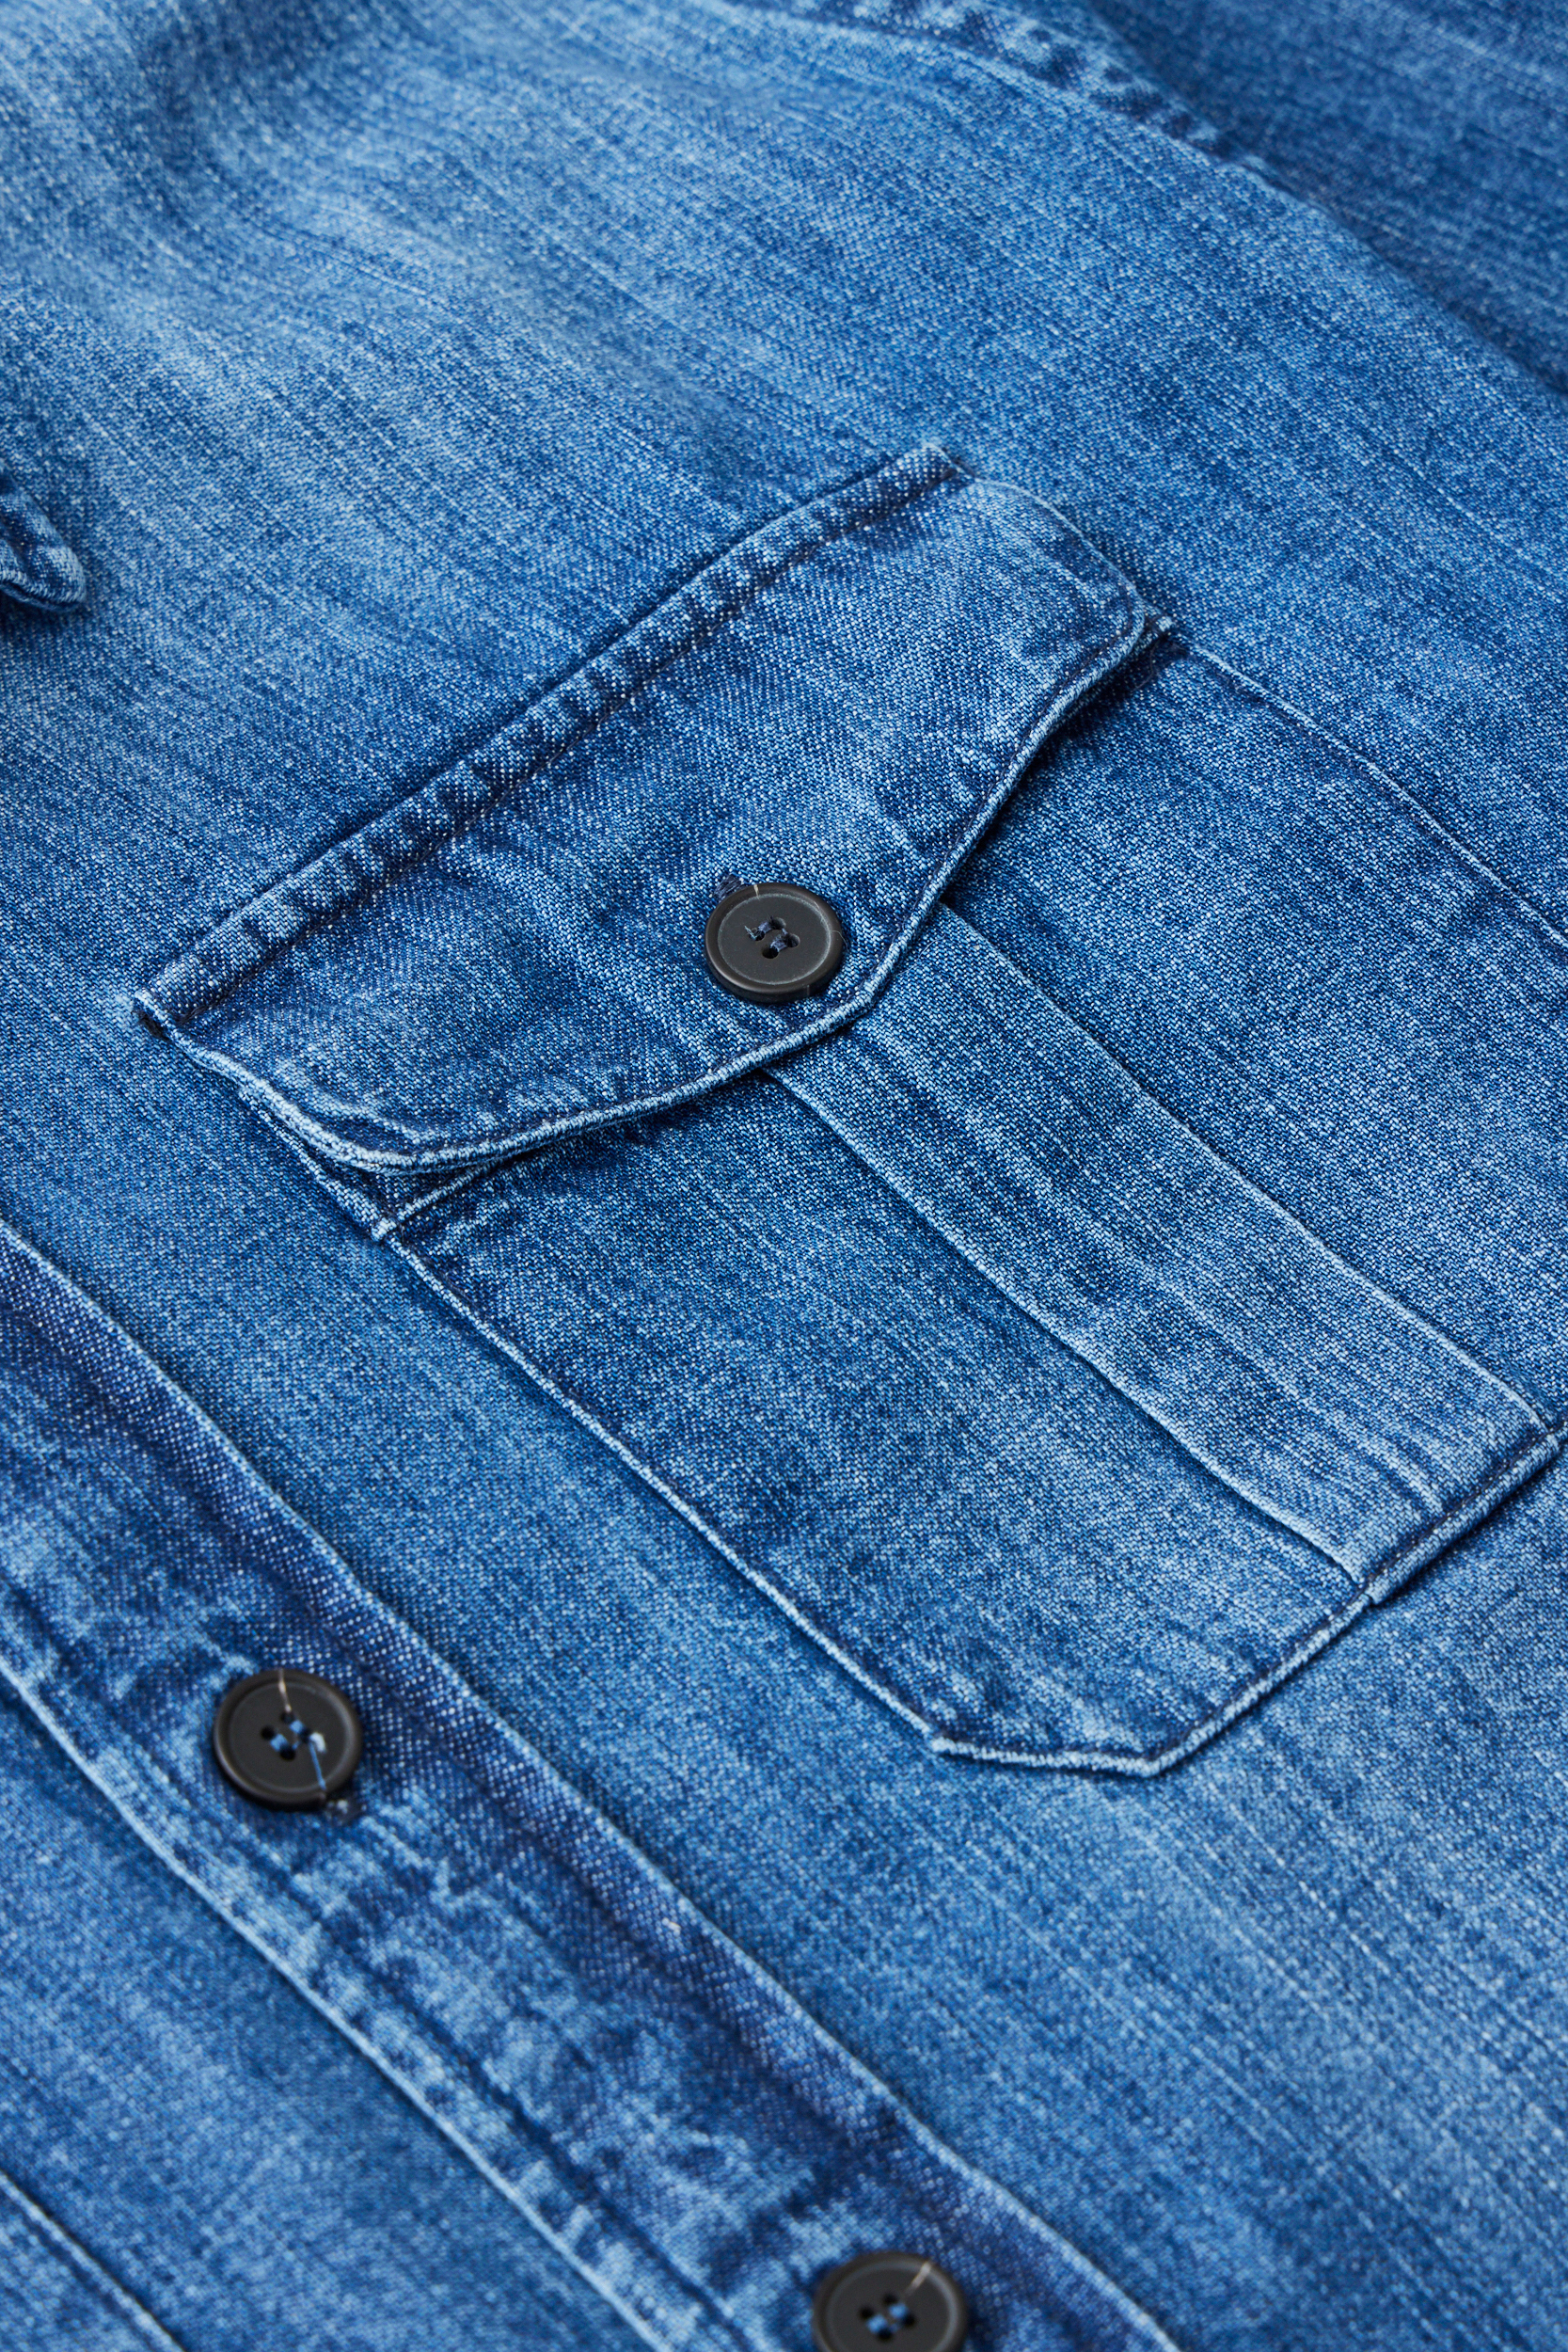 Discover more than 239 blue denim work shirts best